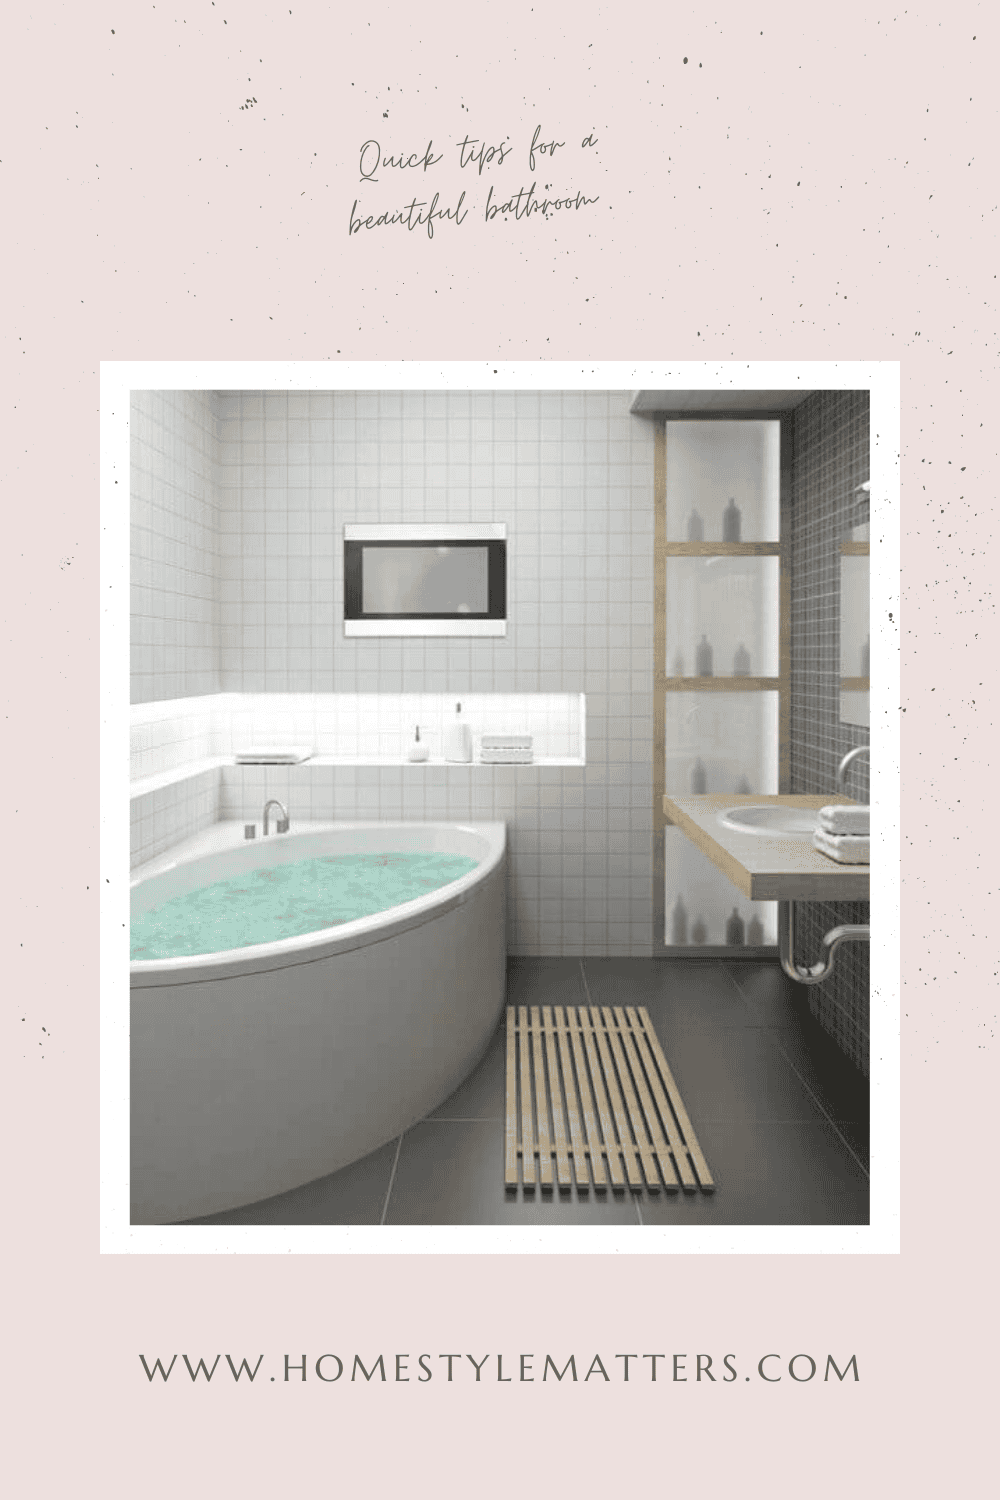 Quick tips for a beautiful bathroom 4